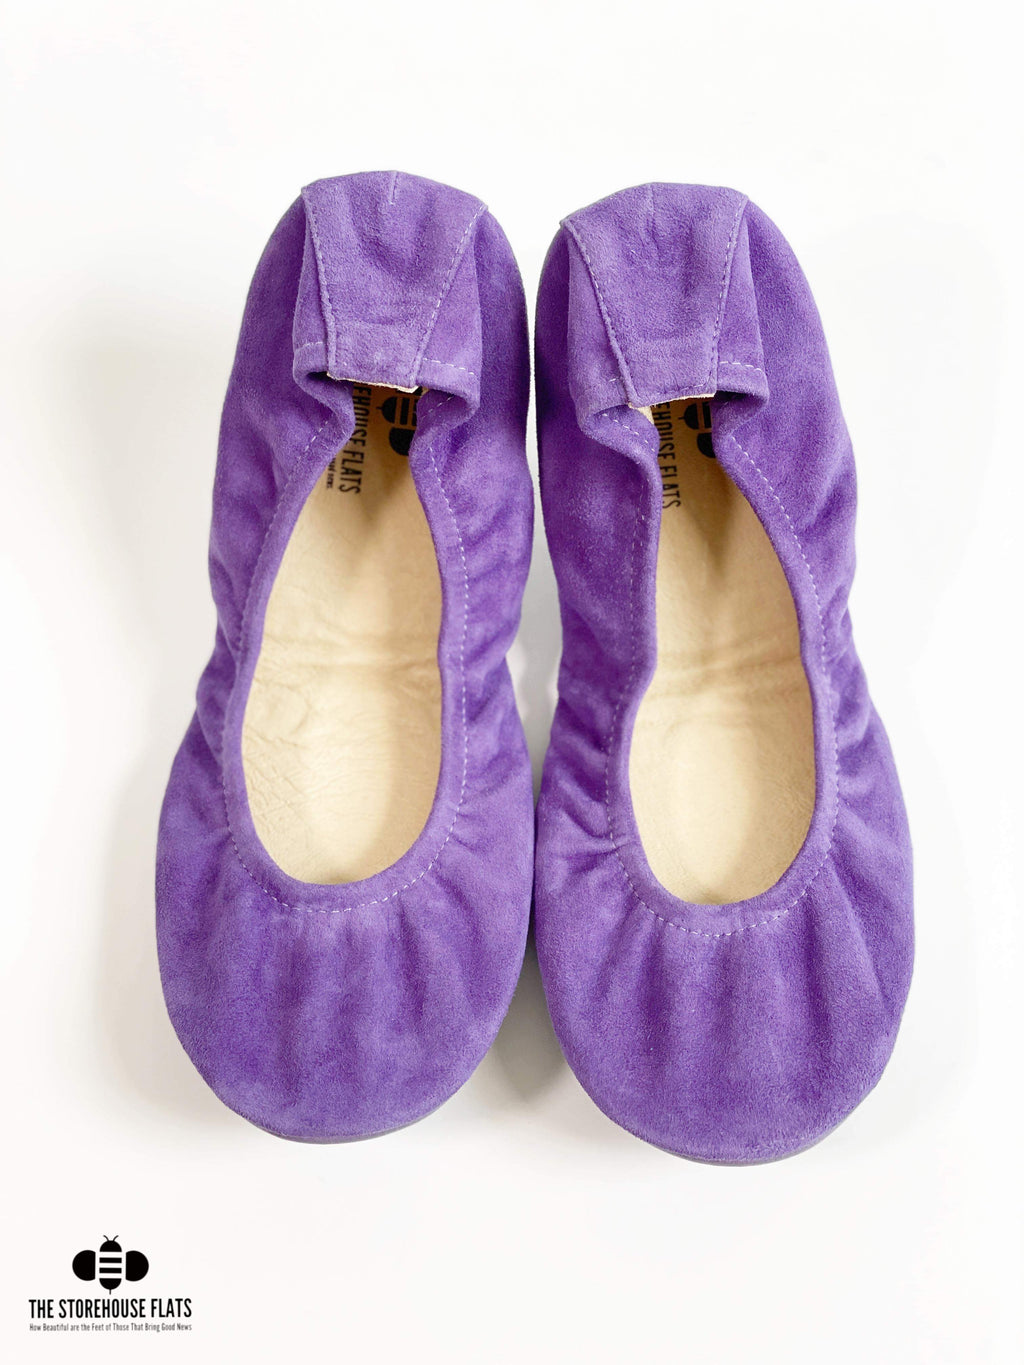 GUMBALL GRAPE SUEDE | JUNE PREORDER - The Storehouse Flats